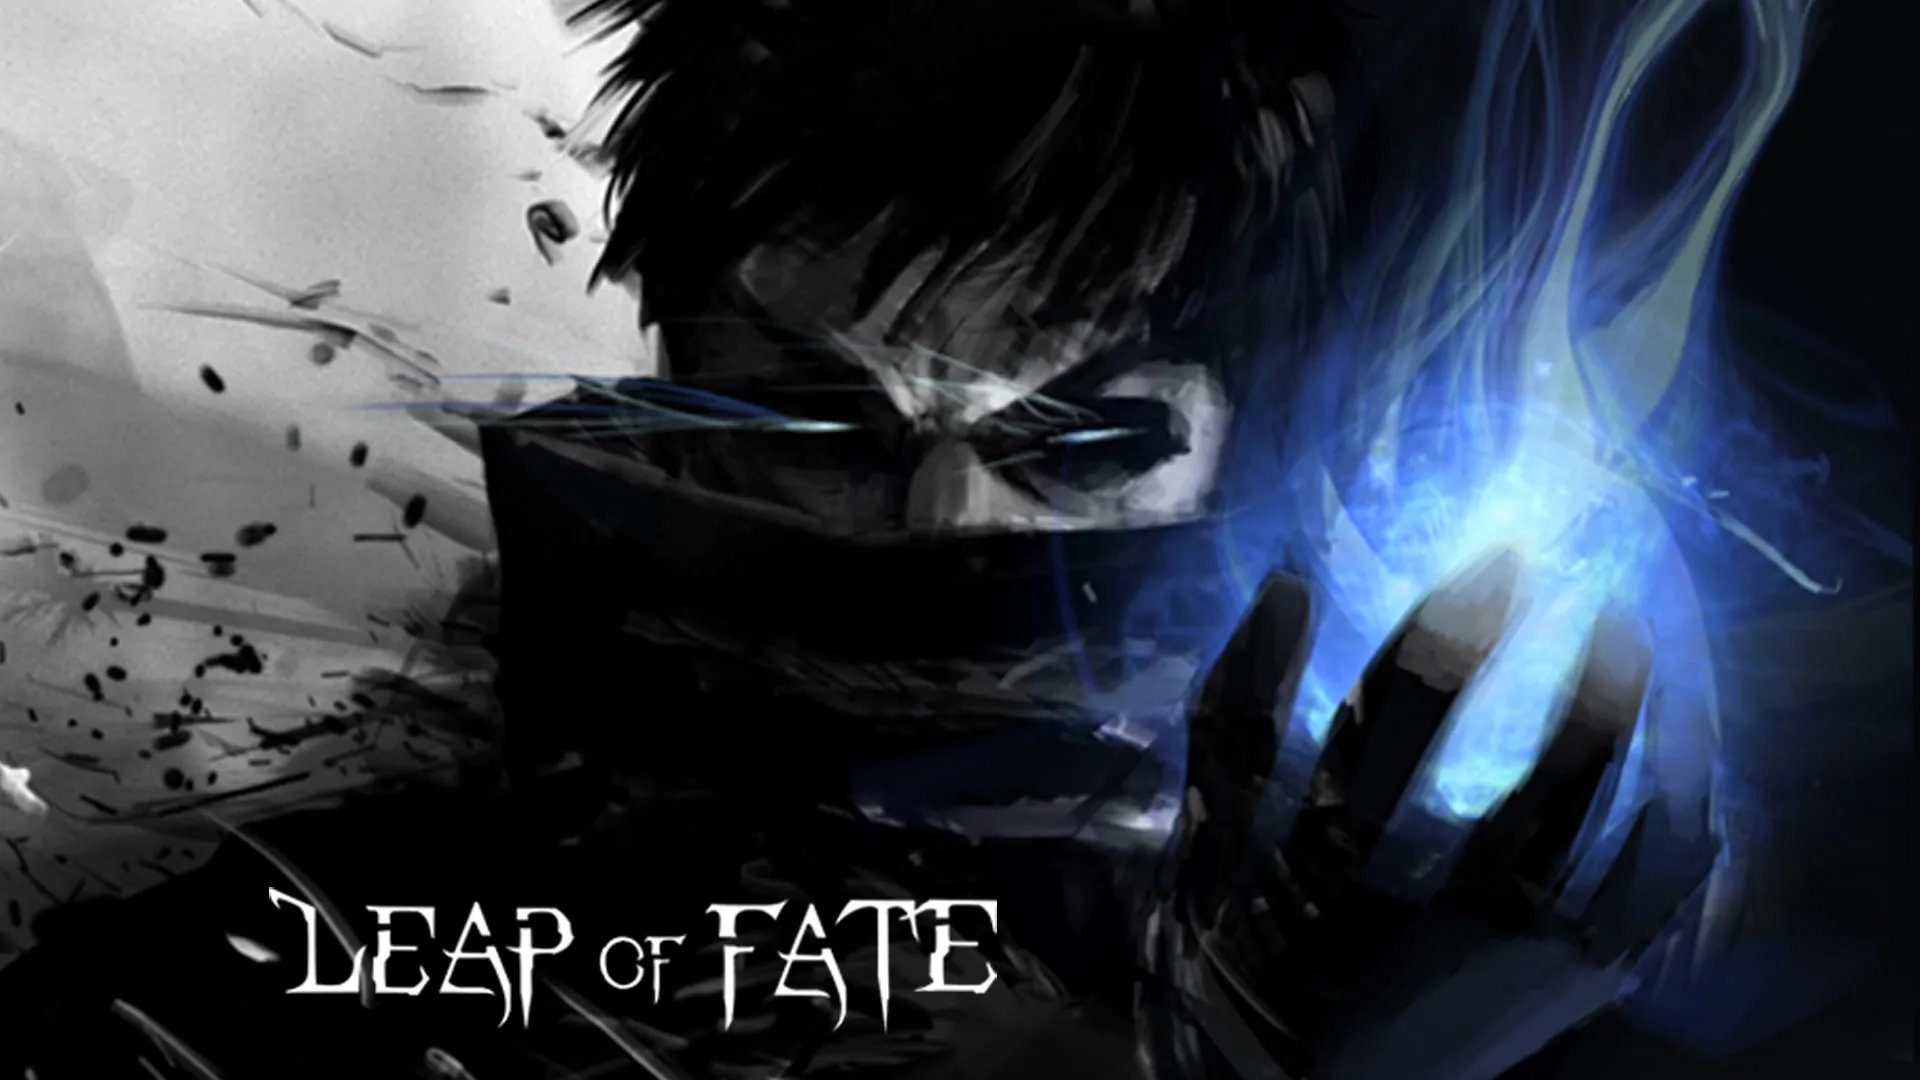 leap-of-fate-android-apk-download-droidapk-org